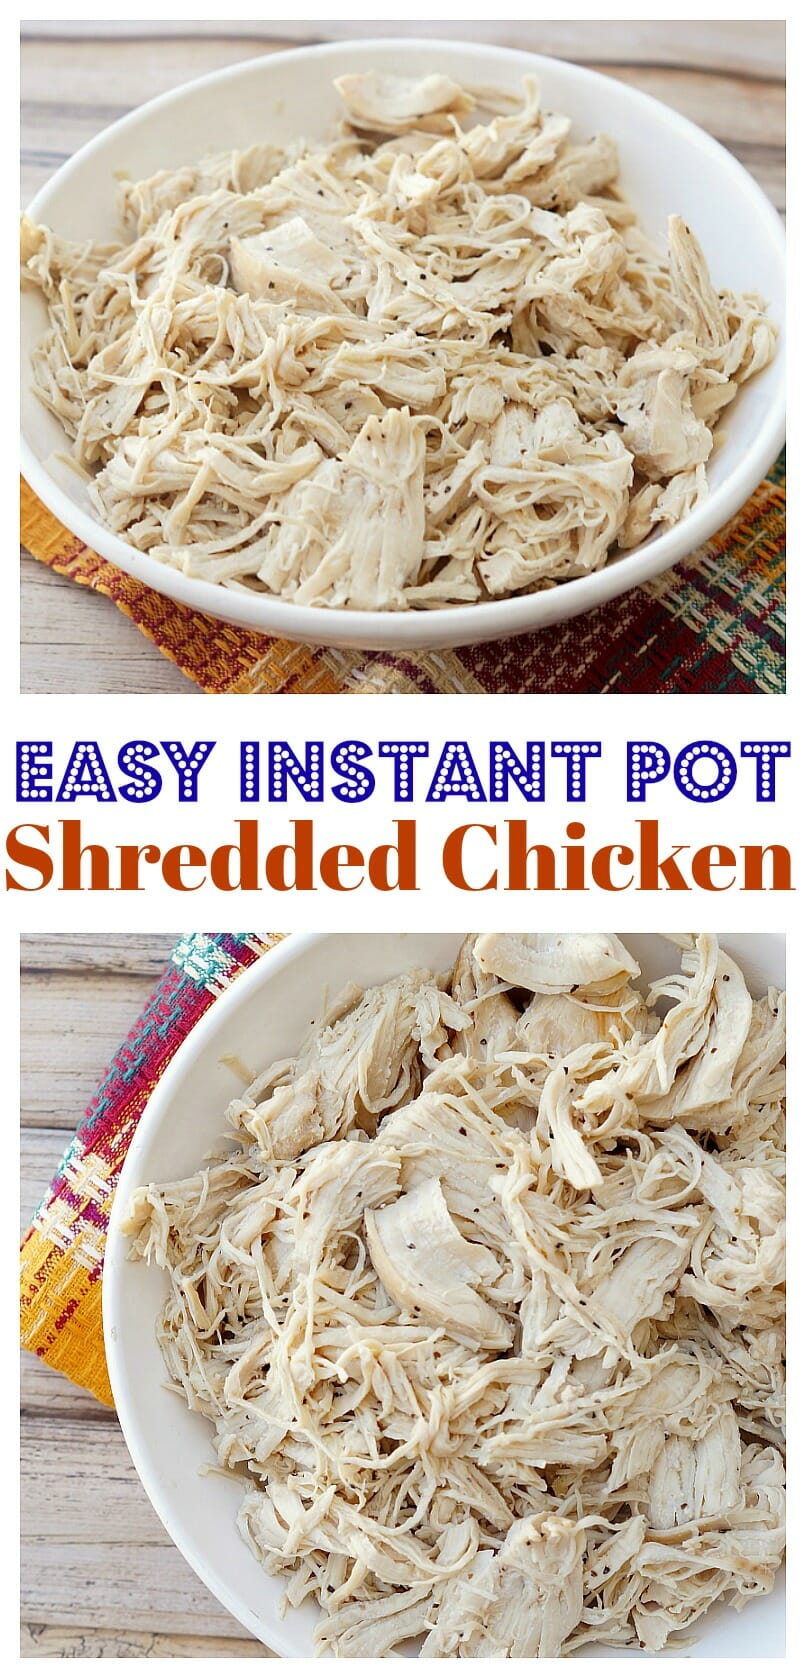 Easy Instant Pot Shredded Chicken. How to cook chicken breasts in the Instant Pot to get perfectly shreddable chicken!